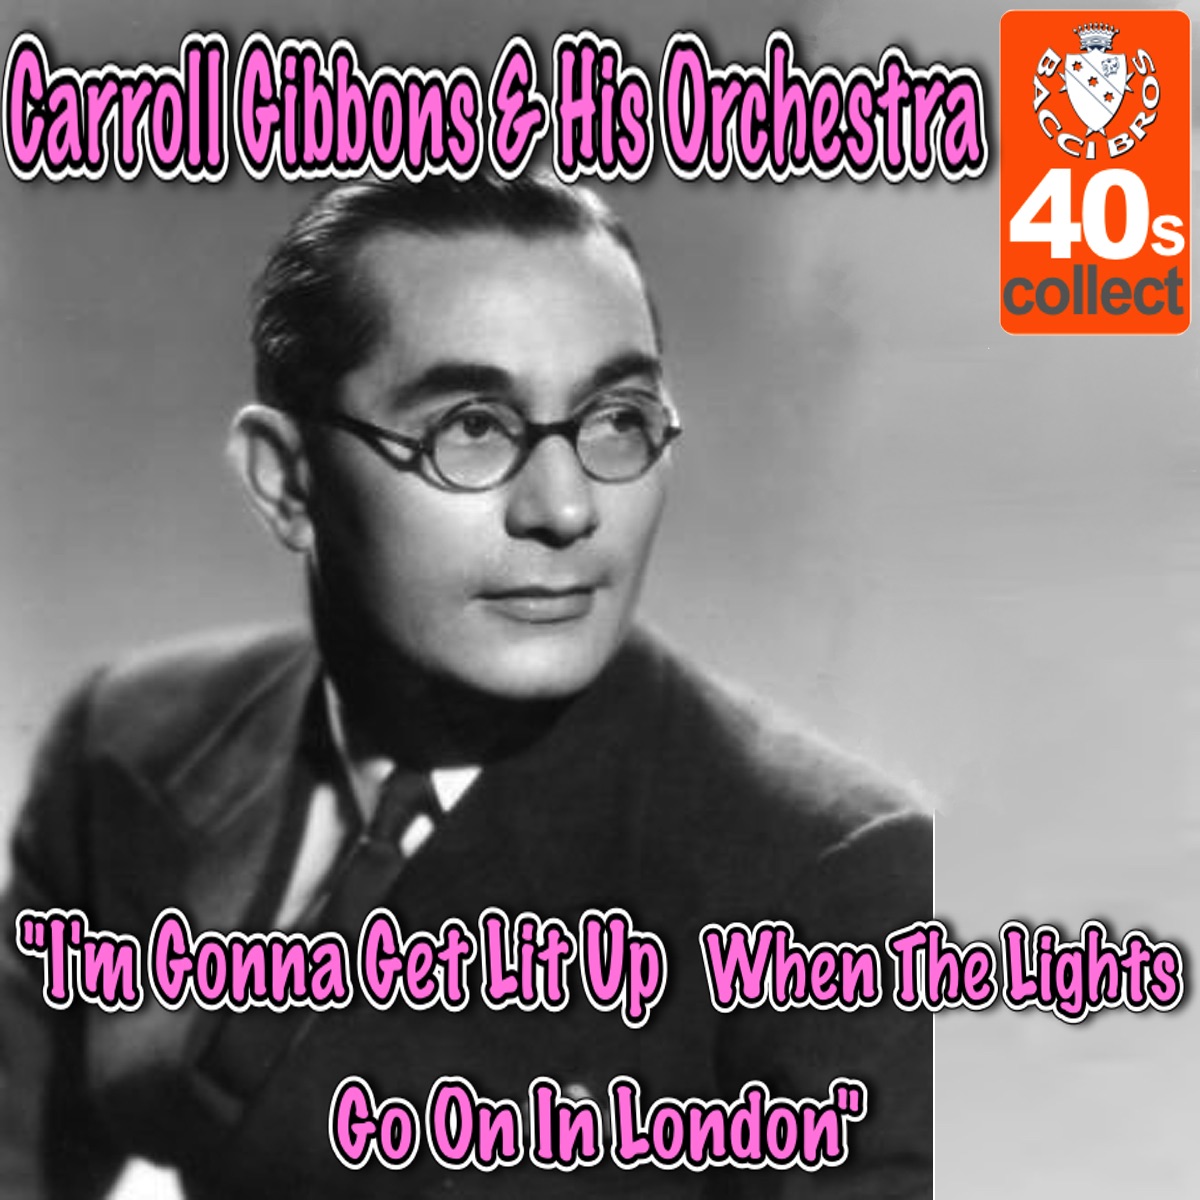 I'm Gonna Get Lit Up When The Lights Go On In London - Single - Album di  Carroll Gibbons and His Orchestra - Apple Music